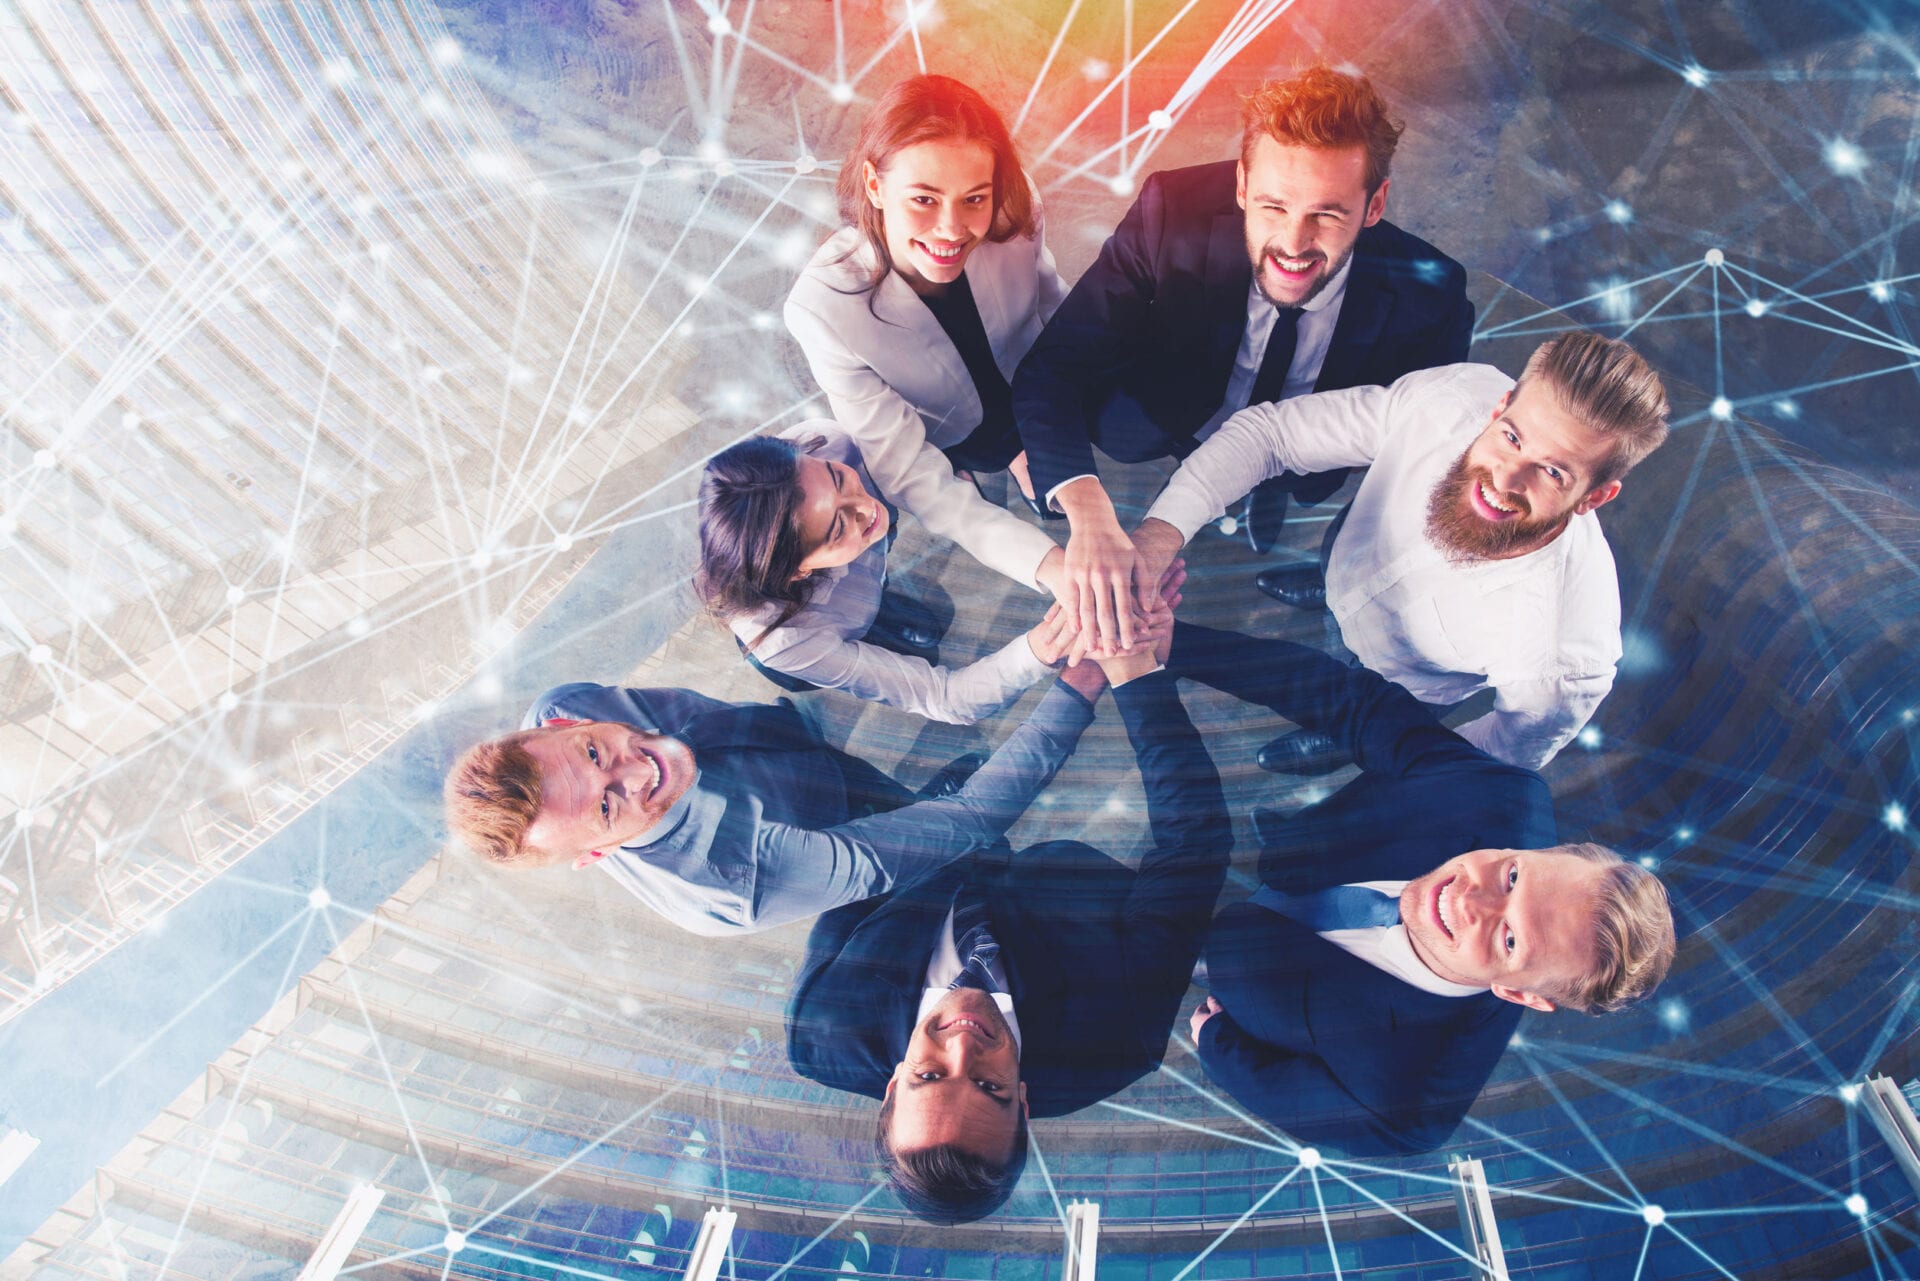 Business people putting their hands together in office with internet network effects. Concept of integration, teamwork and partnership. double exposure